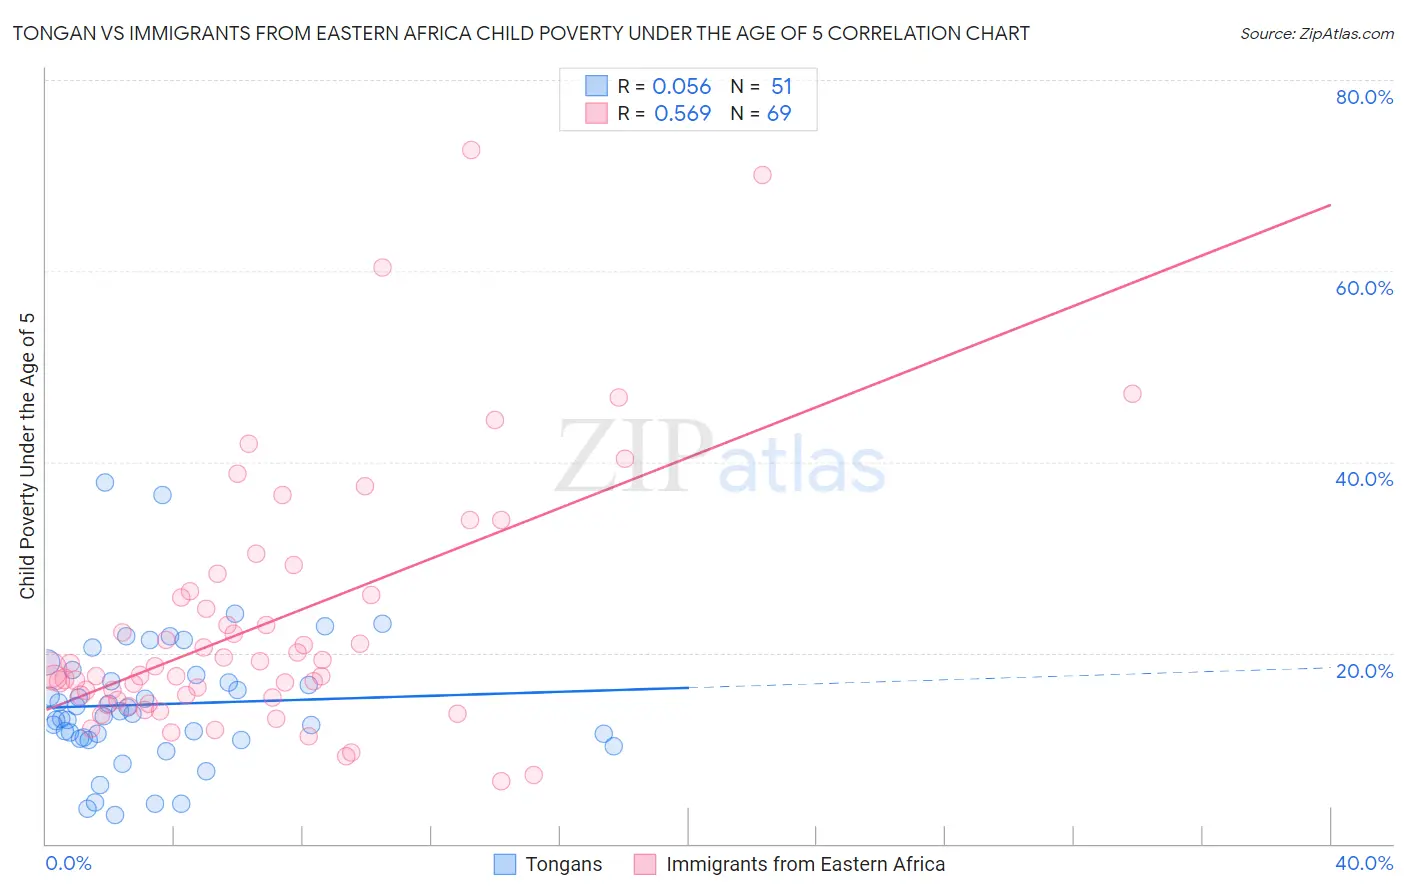 Tongan vs Immigrants from Eastern Africa Child Poverty Under the Age of 5